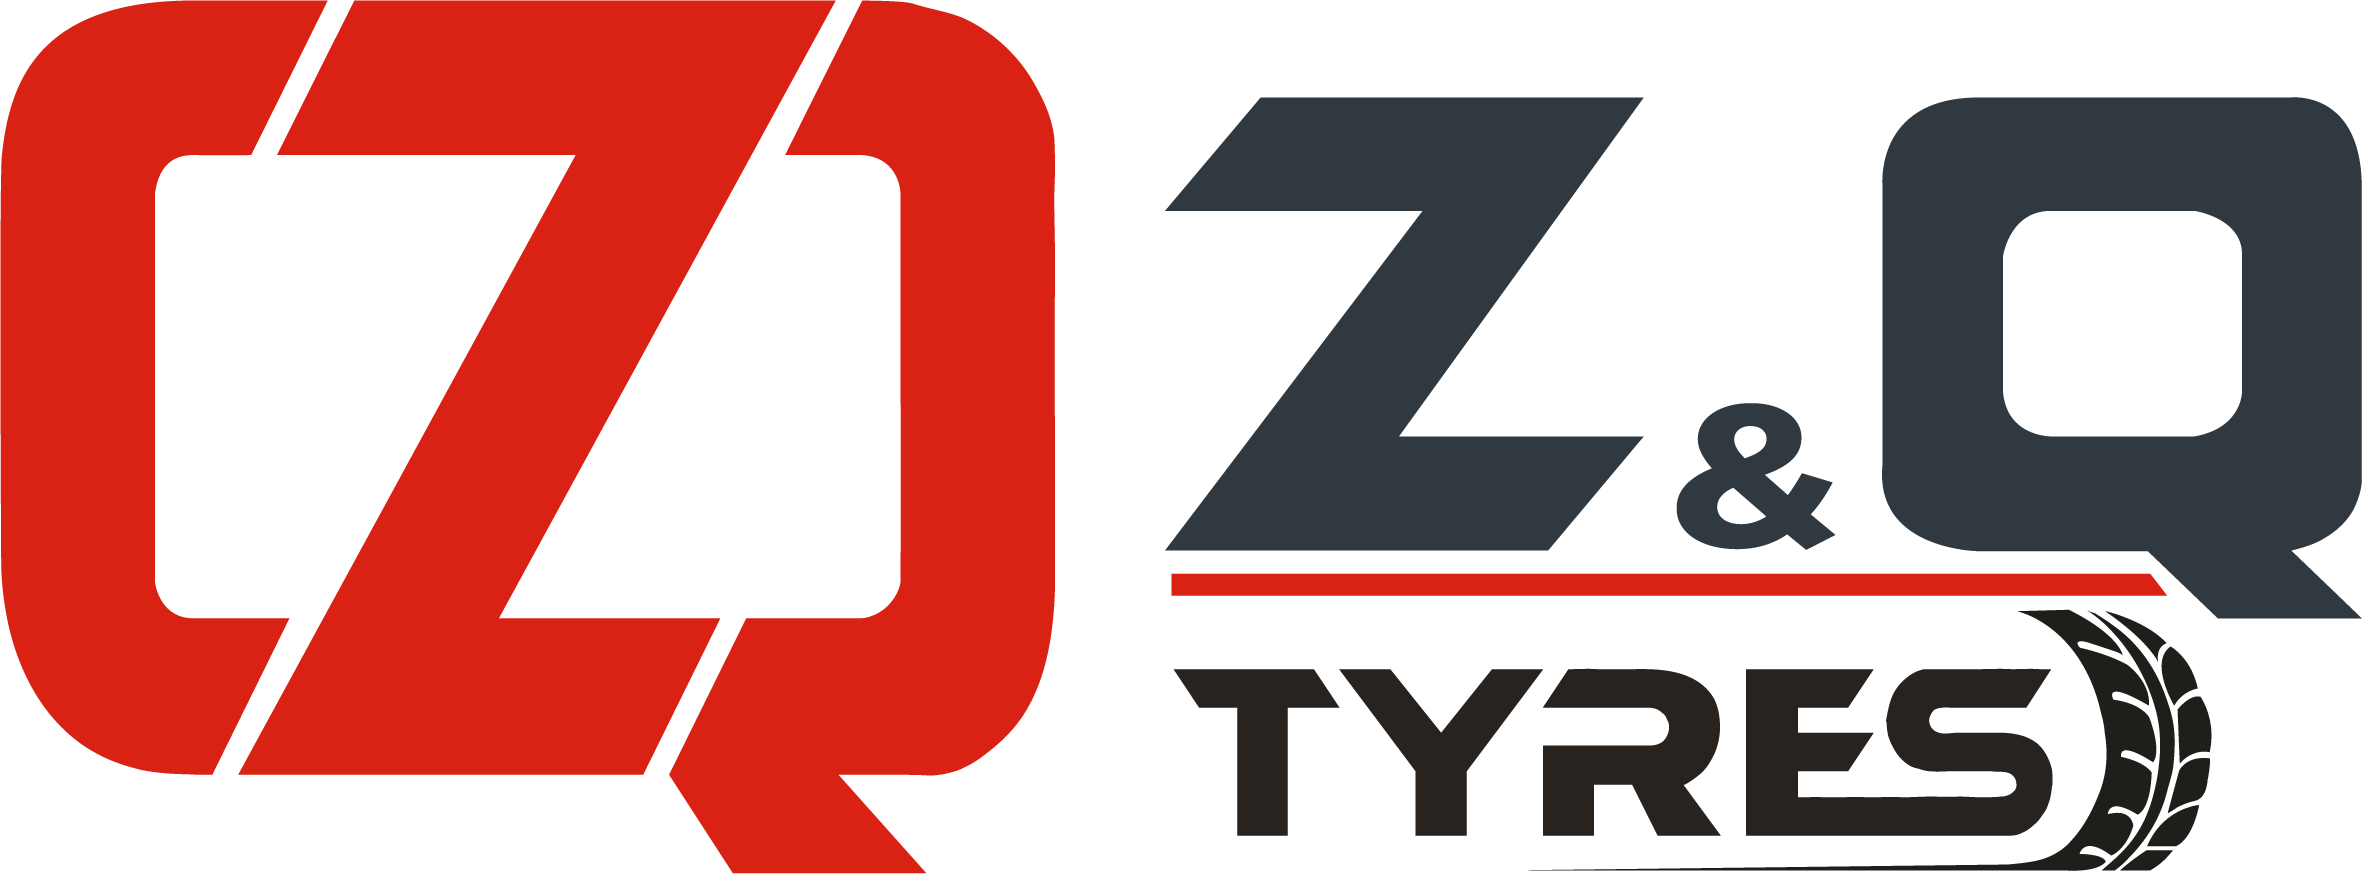 ZQ TYRES | ZQ MONTANA Agricultural Tire Manufacturer | ZQ WARRIOR Forklift Infill Tire Manufacturer | ZQ WOLF Hot and Cold Retread | ATIRE & MAXAM Turkey Distributor Forklift and Construction Machinery Tires 